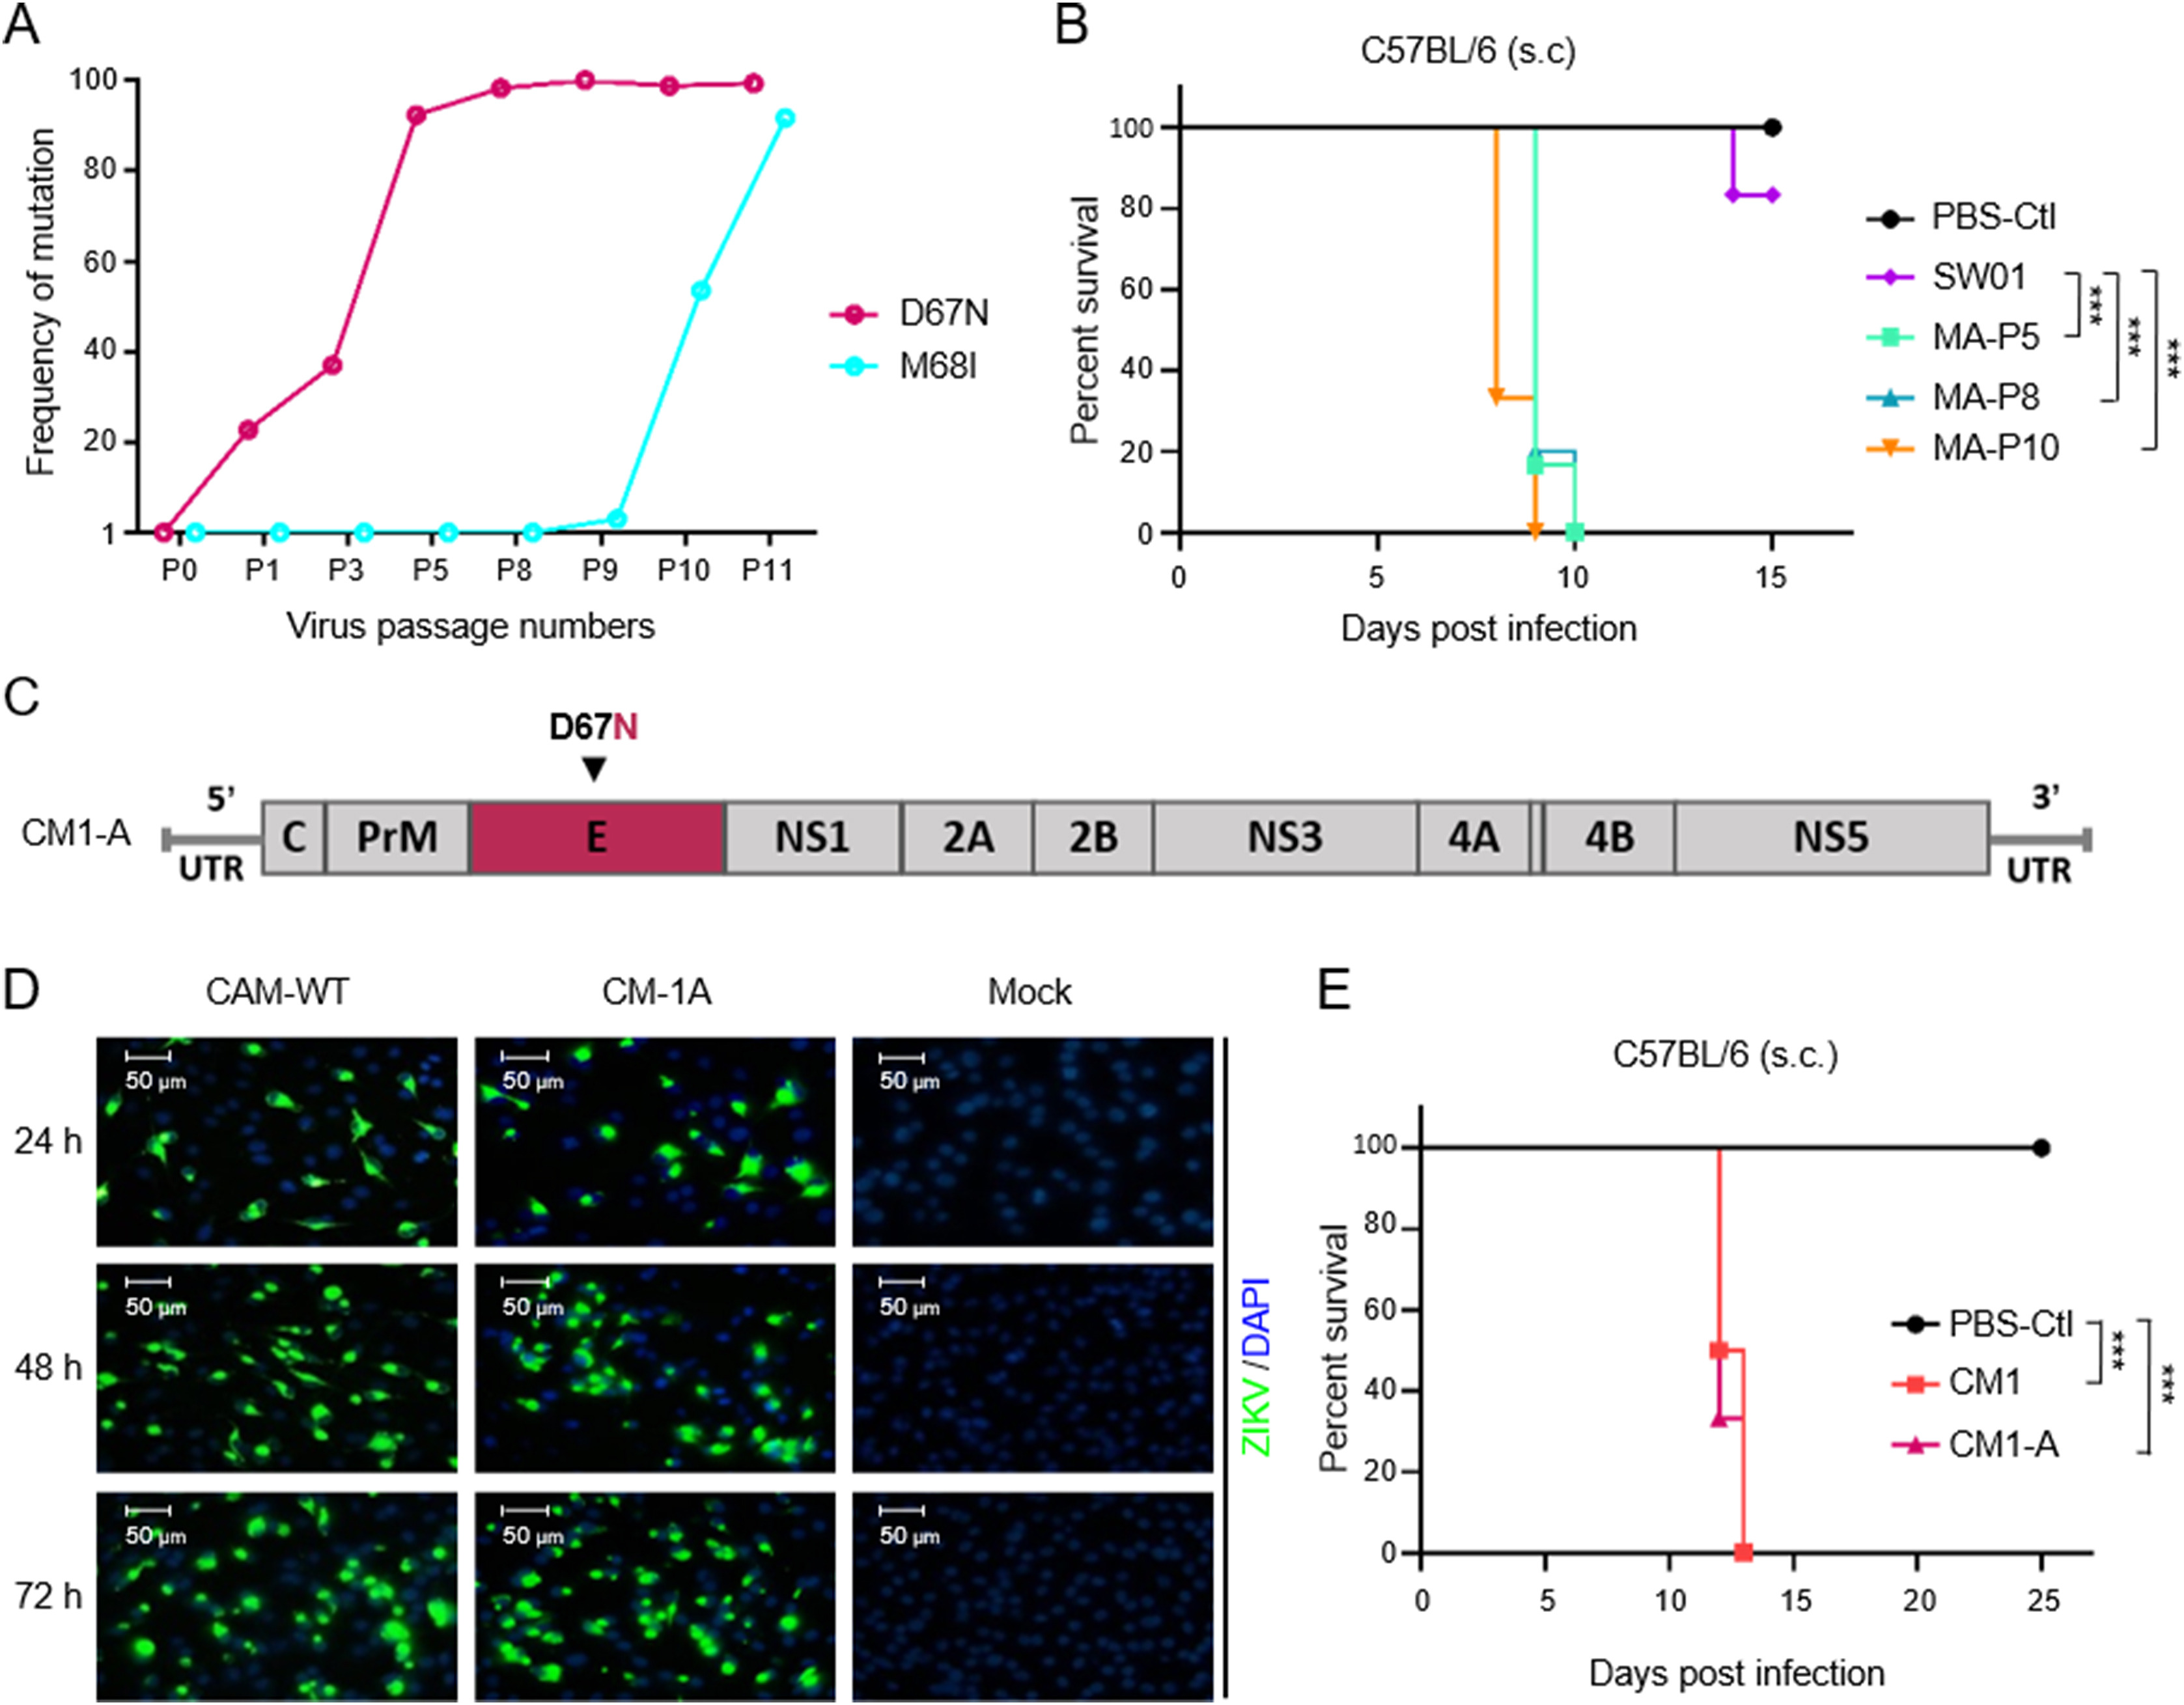 A single nonsynonymous mutation on ZIKV E protein-coding sequences leads to markedly increased neurovirulence <em>in vivo</em>